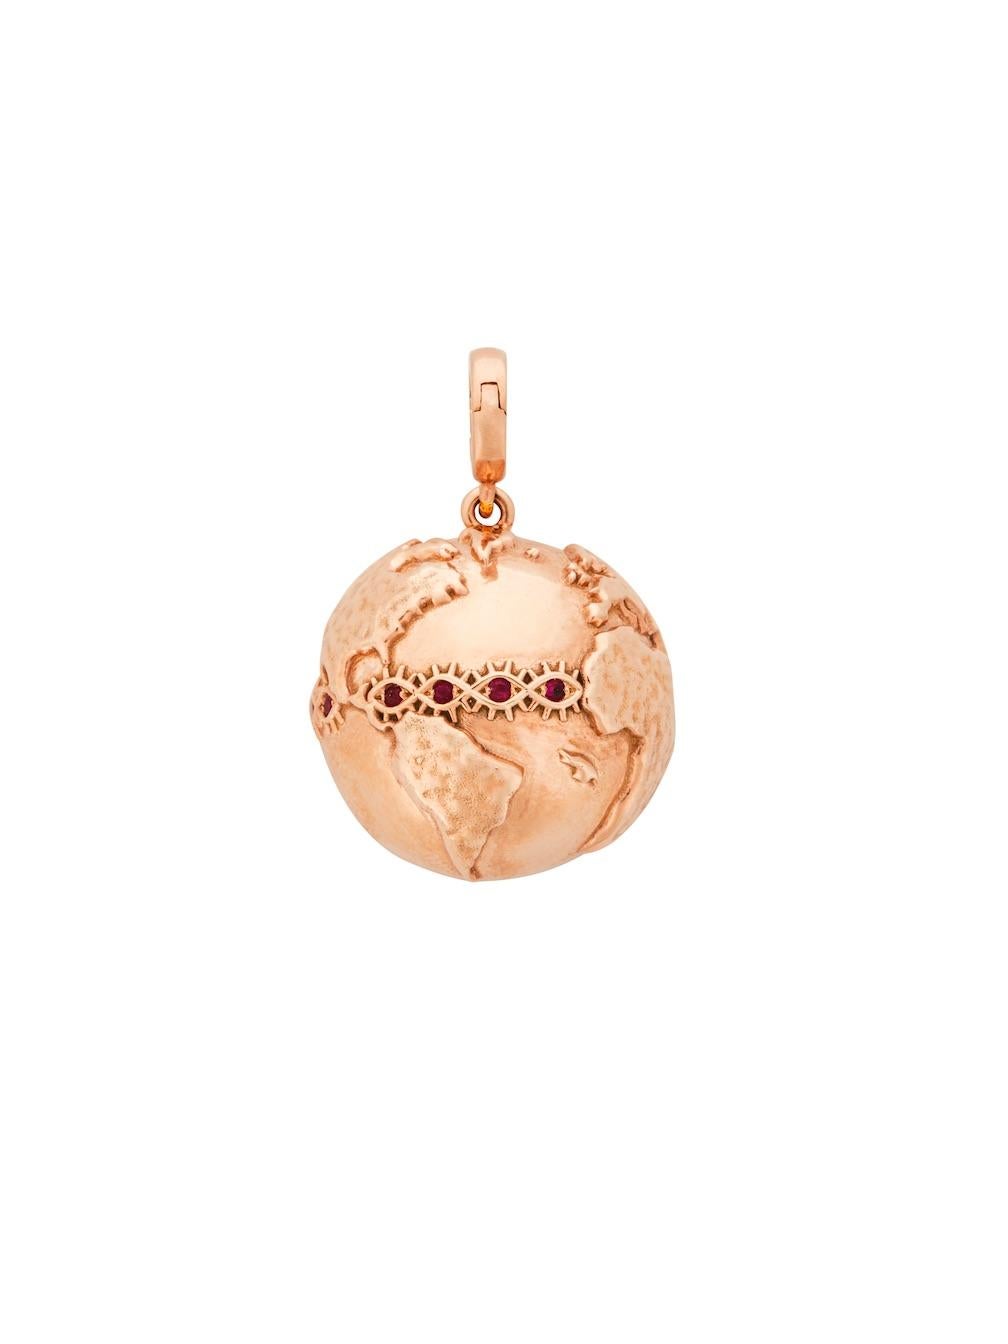 The Earth pendant is designed by Christina Alexiou. 

The Earth pendant is crafted with 9k pink gold and is made in Greece. 
The Earth is hollow, thus this pendant is an easy to wear everyday piece of jewelry. This piece features the element of